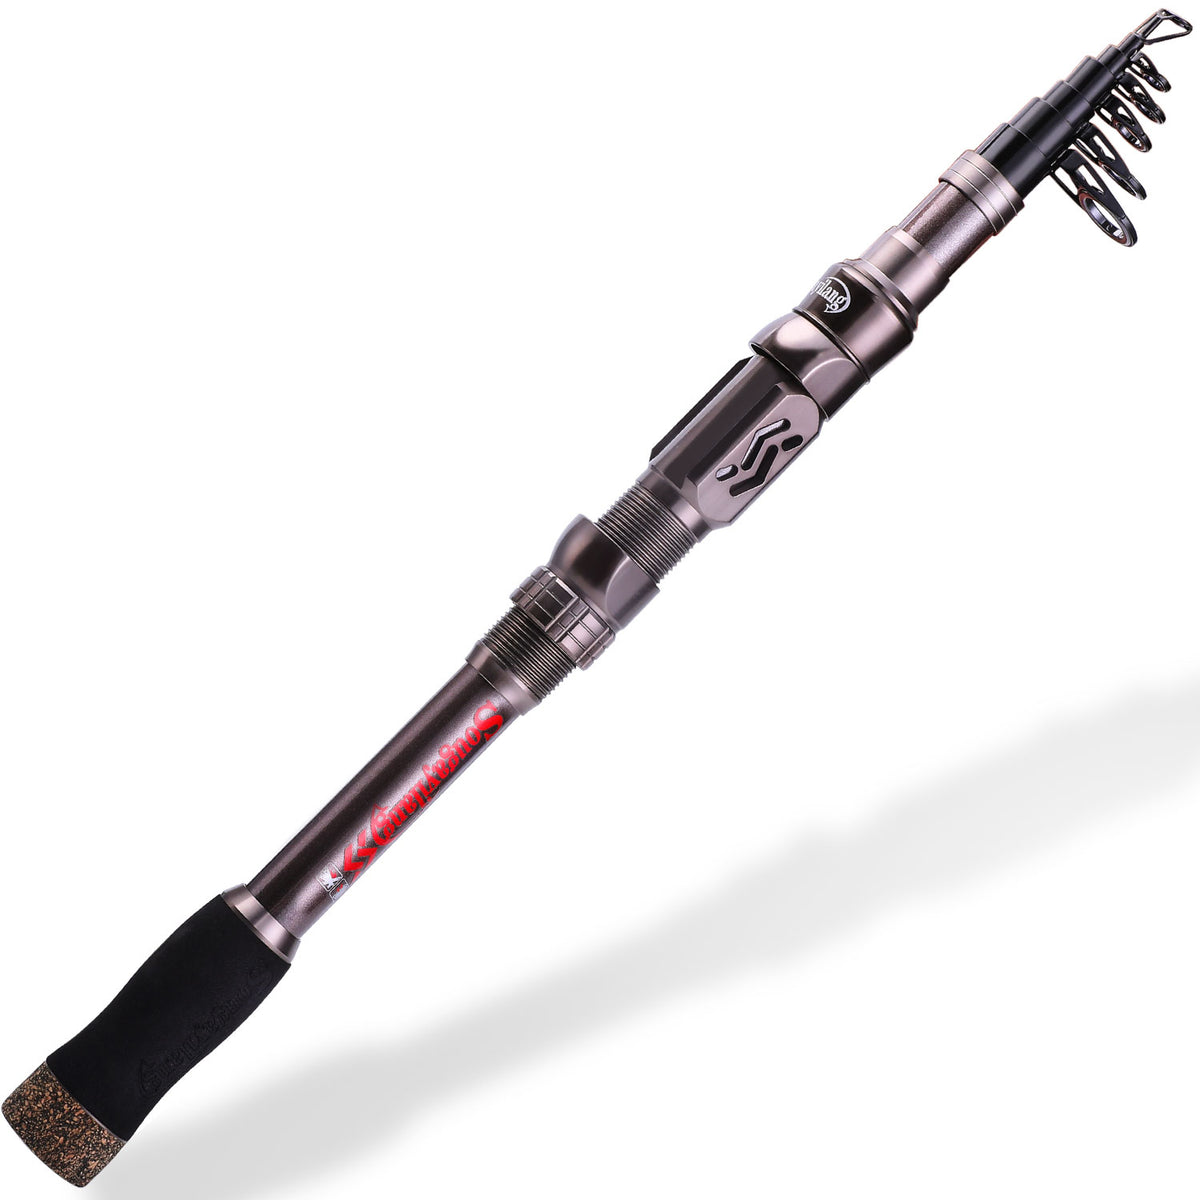 Buy Telescopic Fishing Rod Products Online in Chaguanas at Best